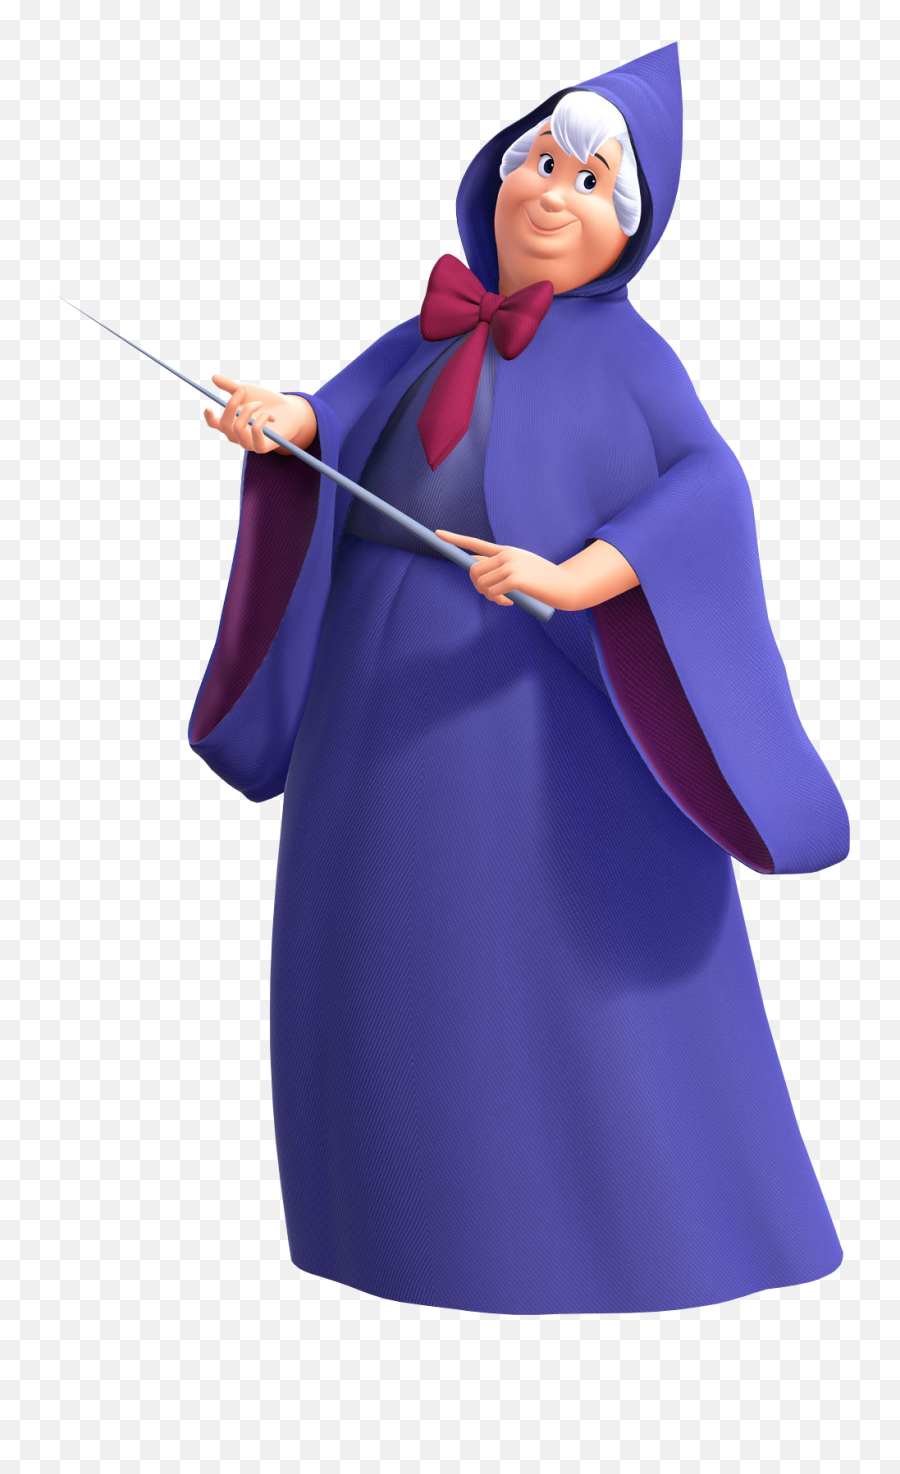 Fairy Godmother - Fairy Godmother Kingdom Hearts Png,Fairy Godmother Png